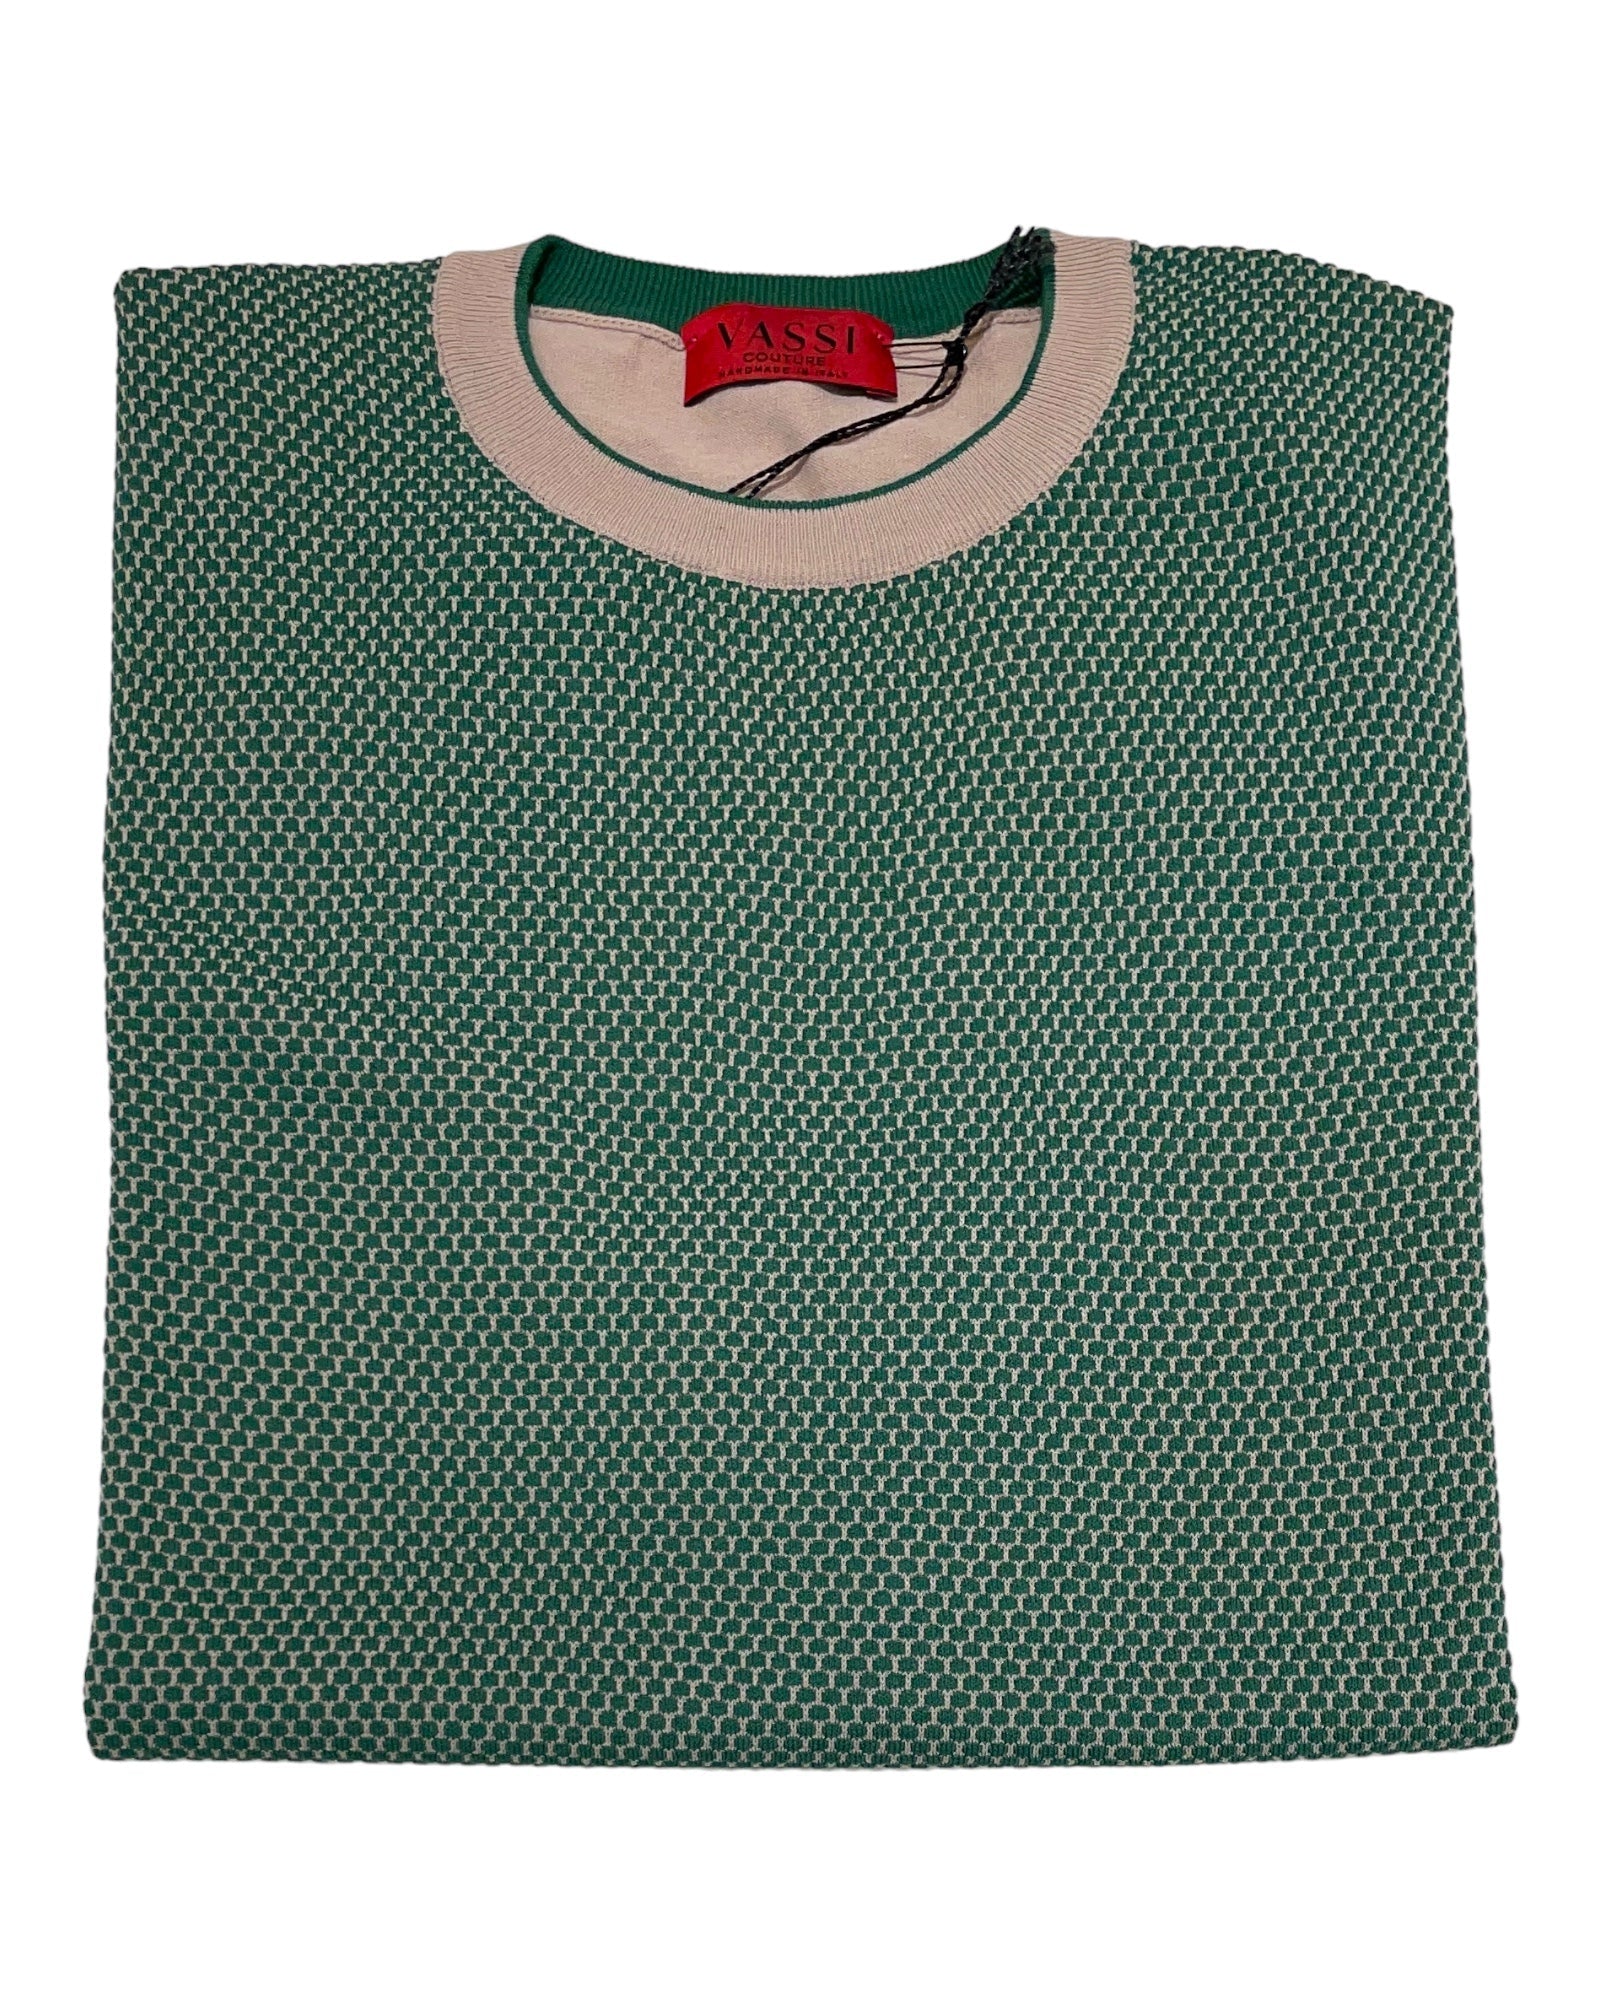 Green Short Sleeve crew neck with Taupe highlights SWEATERS50 EU